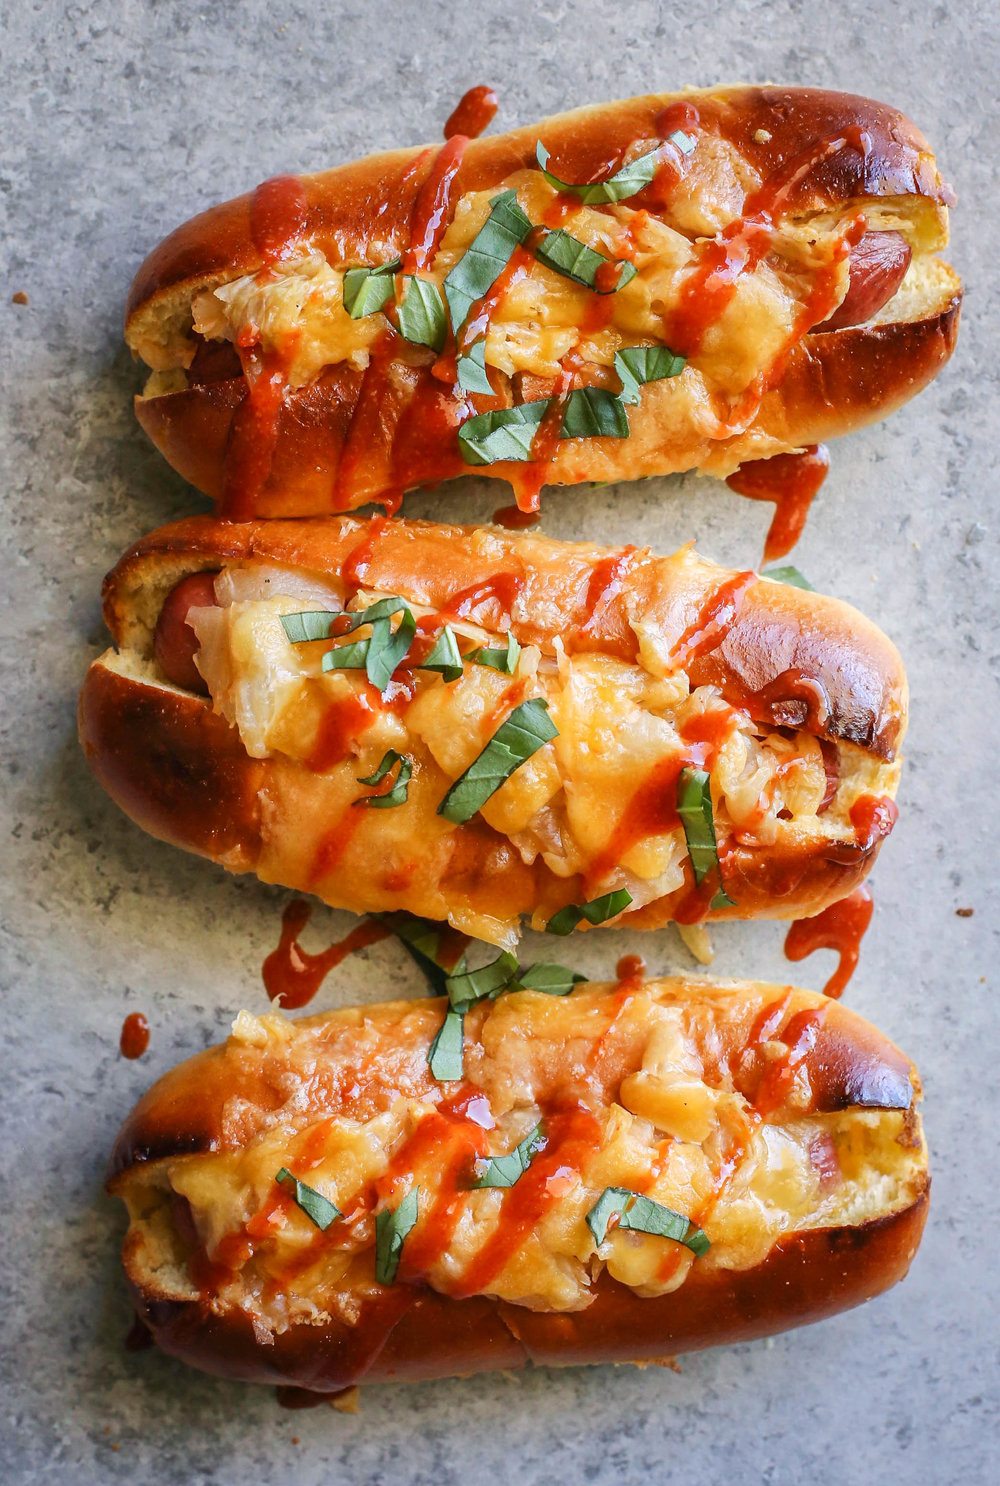 Cheese and Kimchi Hot Dogs